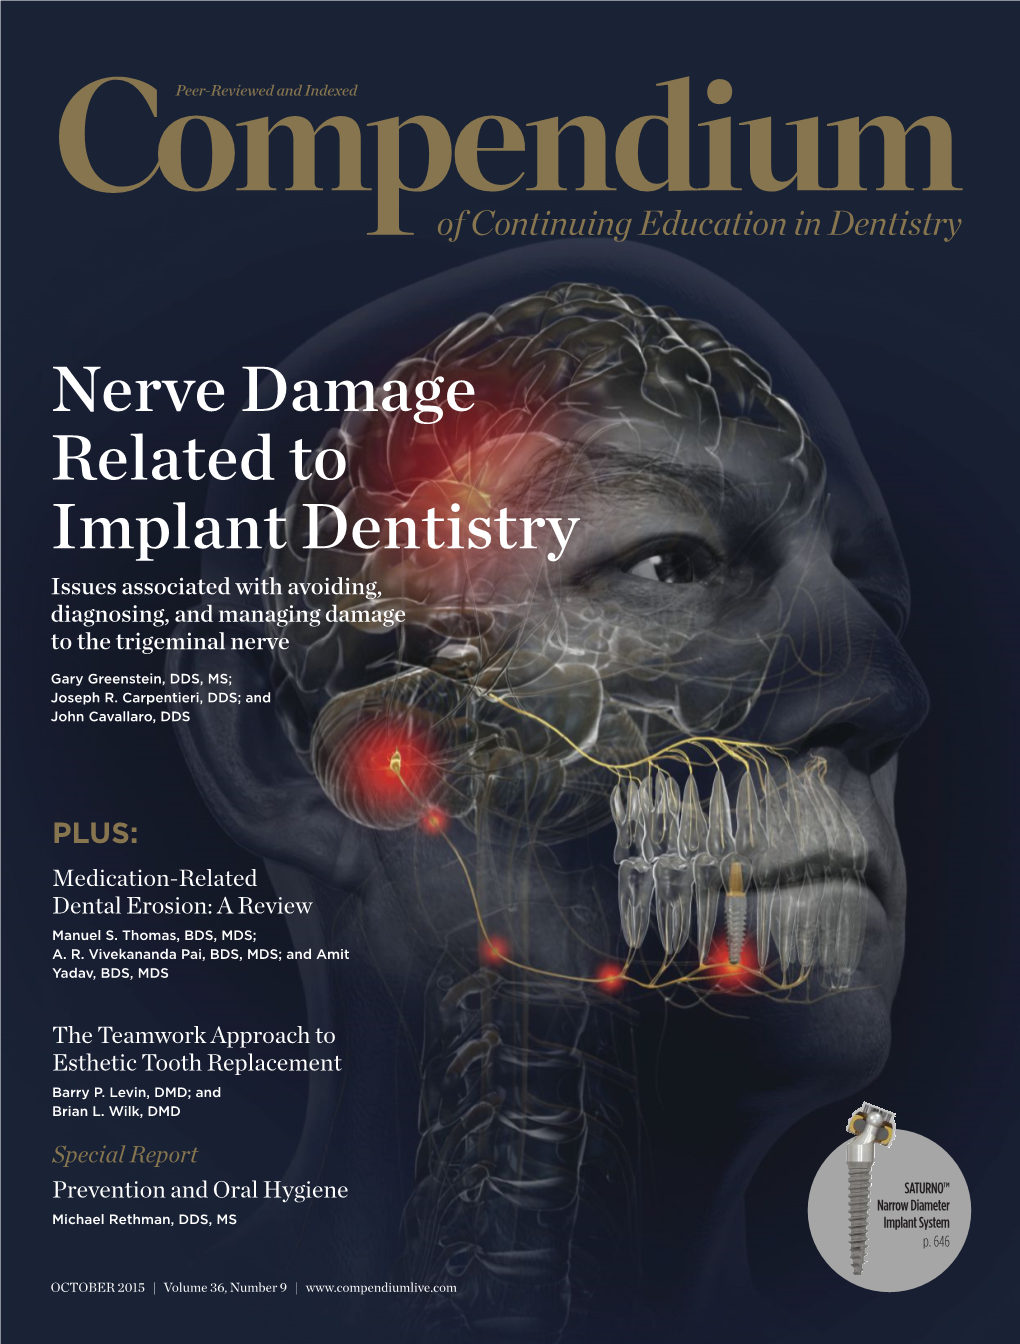 Nerve Damage Related to Implant Dentistry Issues Associated with Avoiding, Diagnosing, and Managing Damage to the Trigeminal Nerve